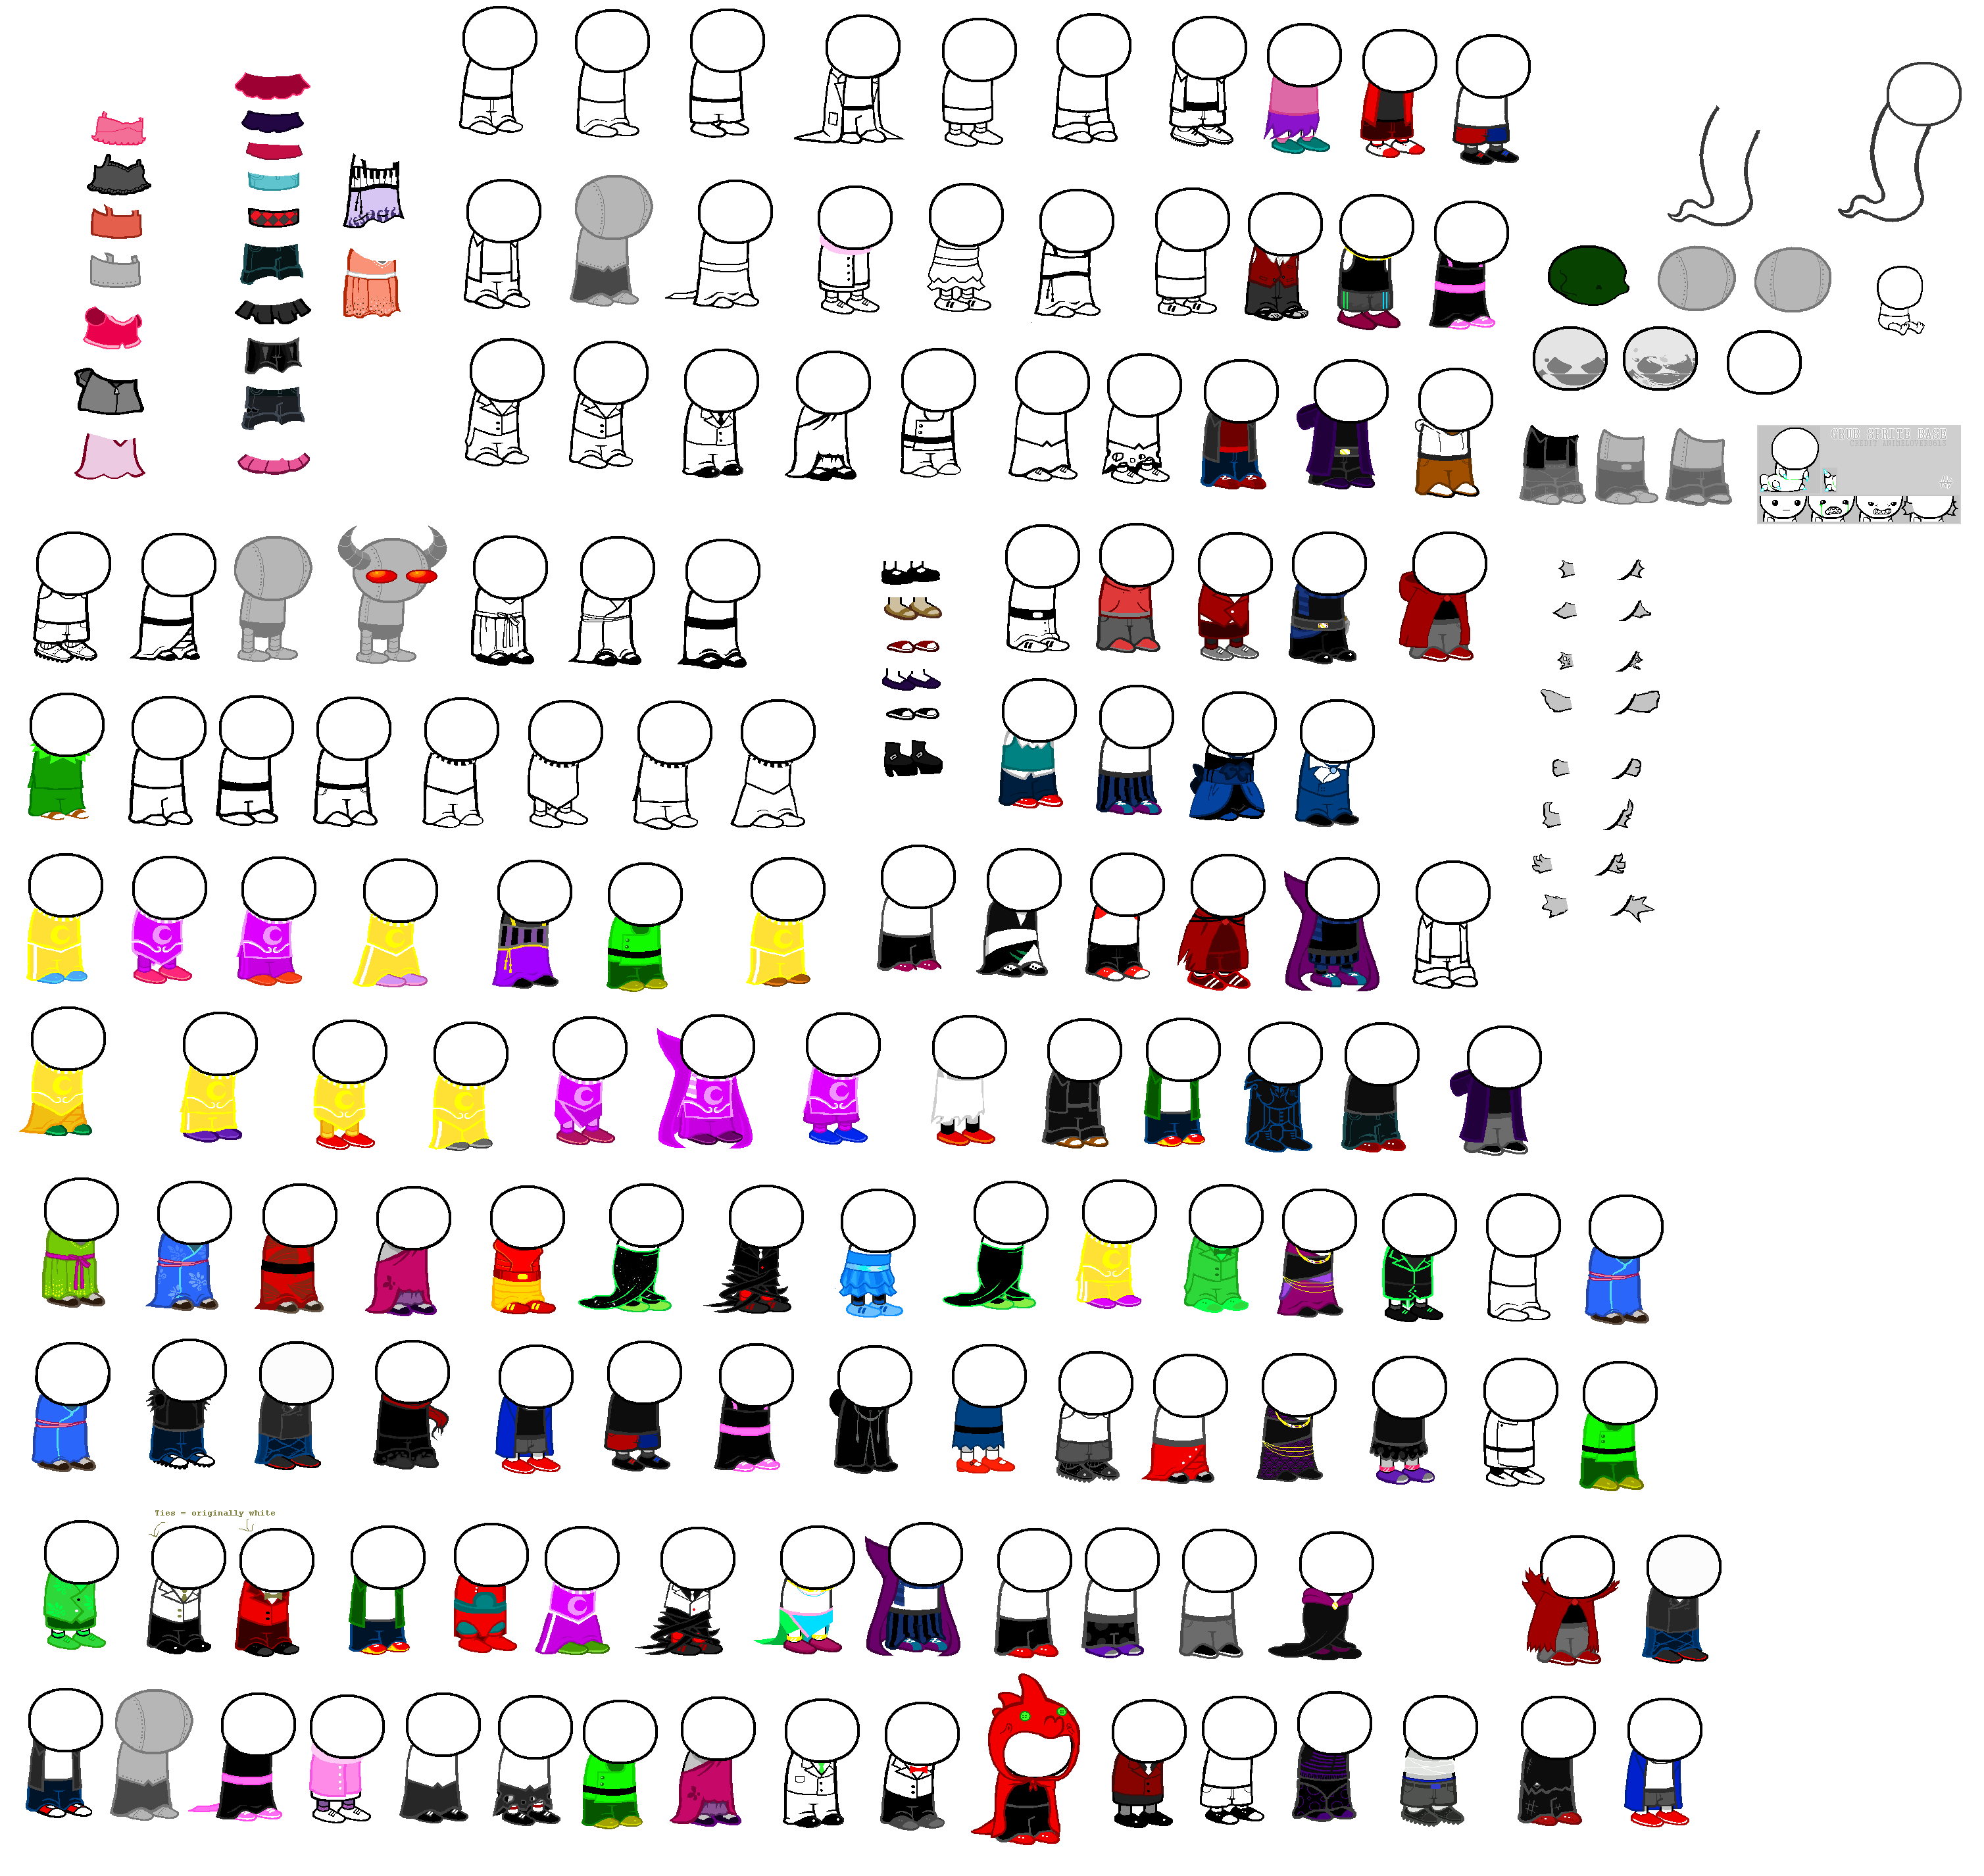 Homestuck Clothes plus Bases Sprite Sheet.png. 